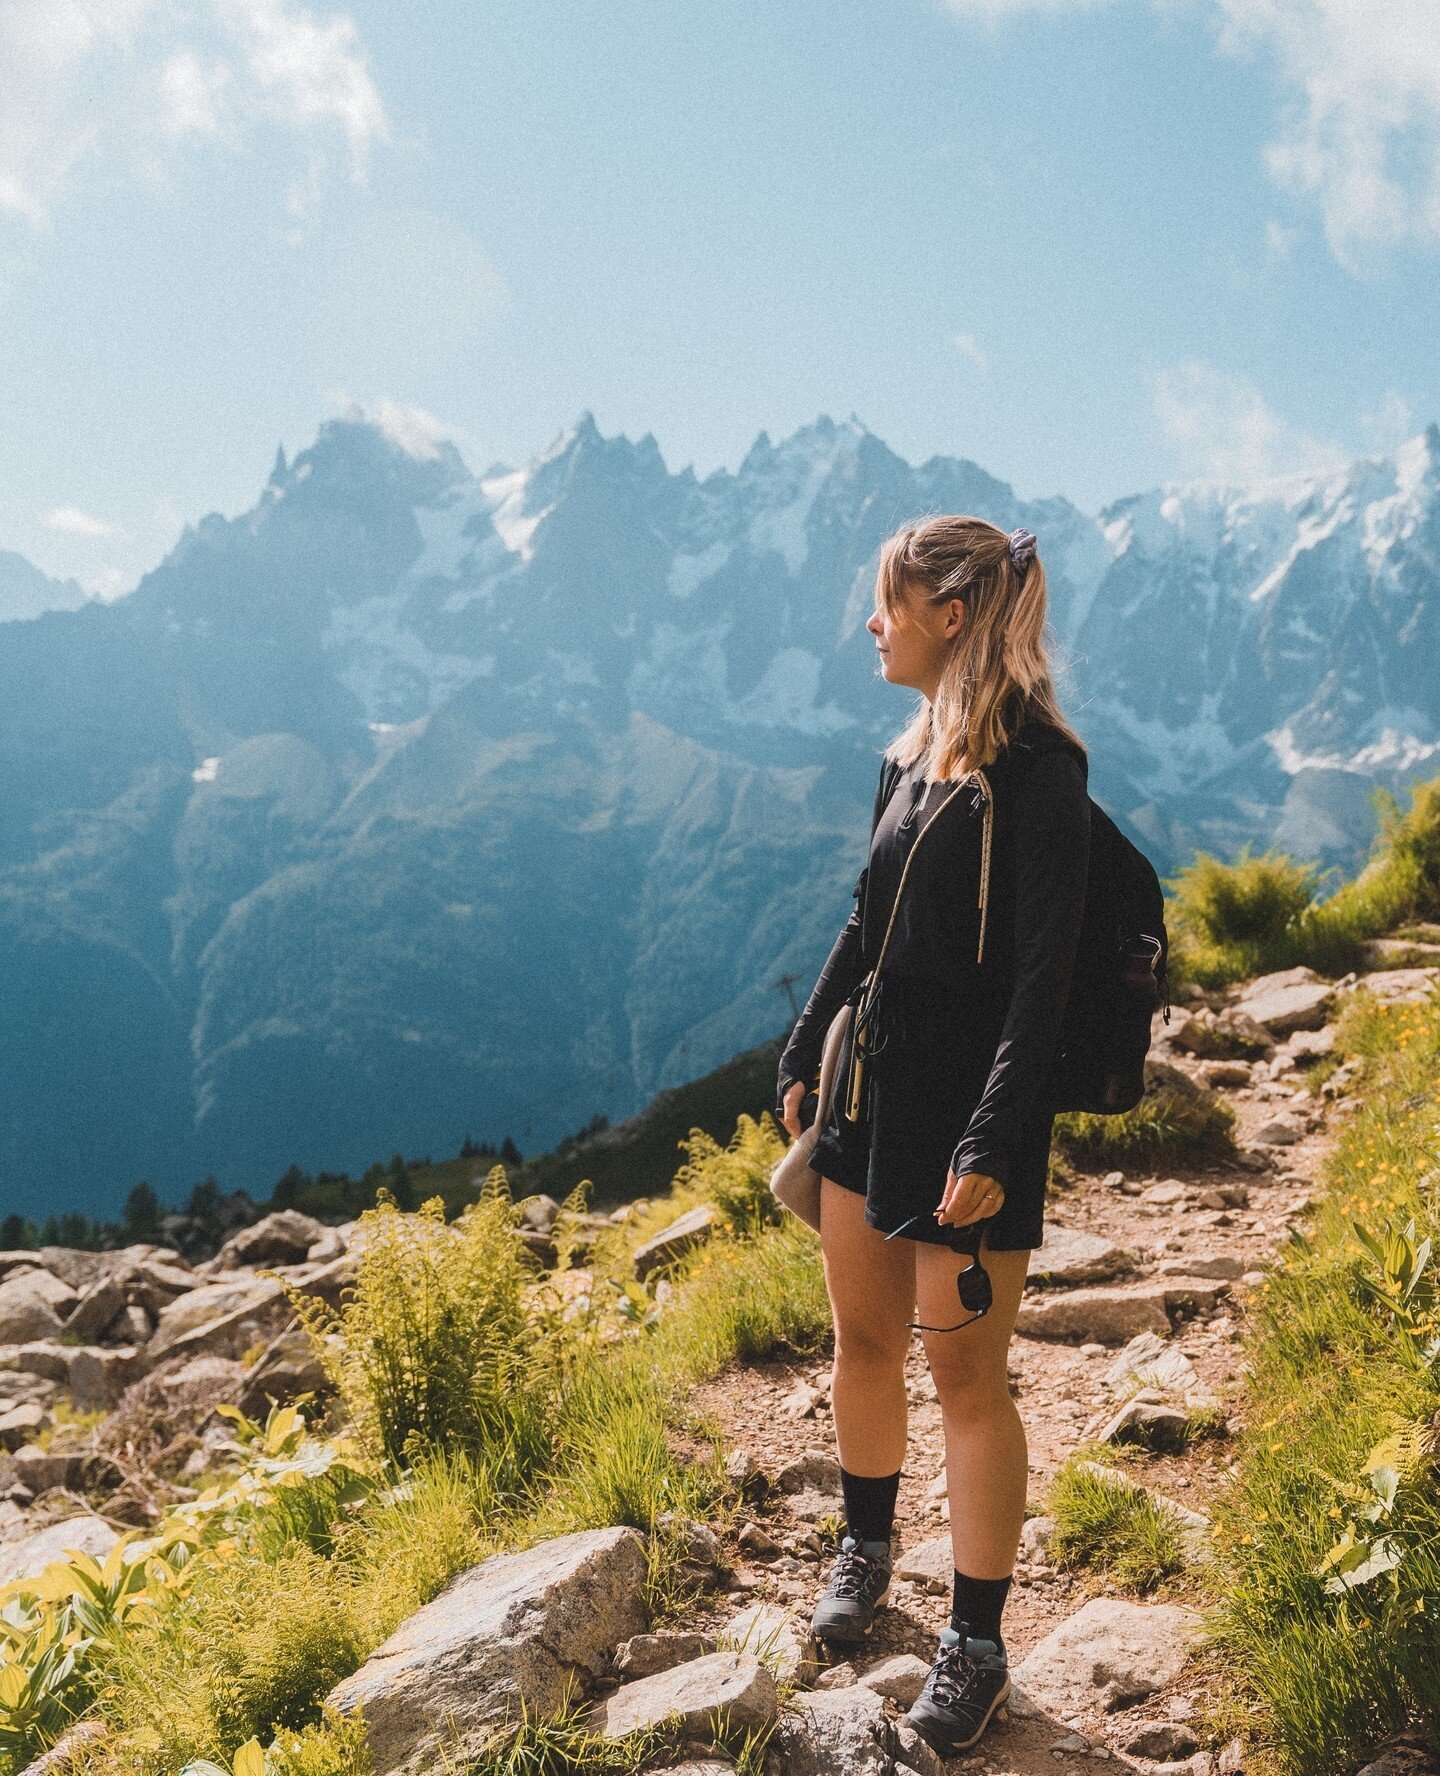 In need of a healthy activity to kick start your week? Not only is it a great low impact exercise, but studies have shown that hiking in nature can drastically improve your mood and combat depression. ⁠
⁠
#samedayhealth ⁠
#hike #mountains #hikingadve